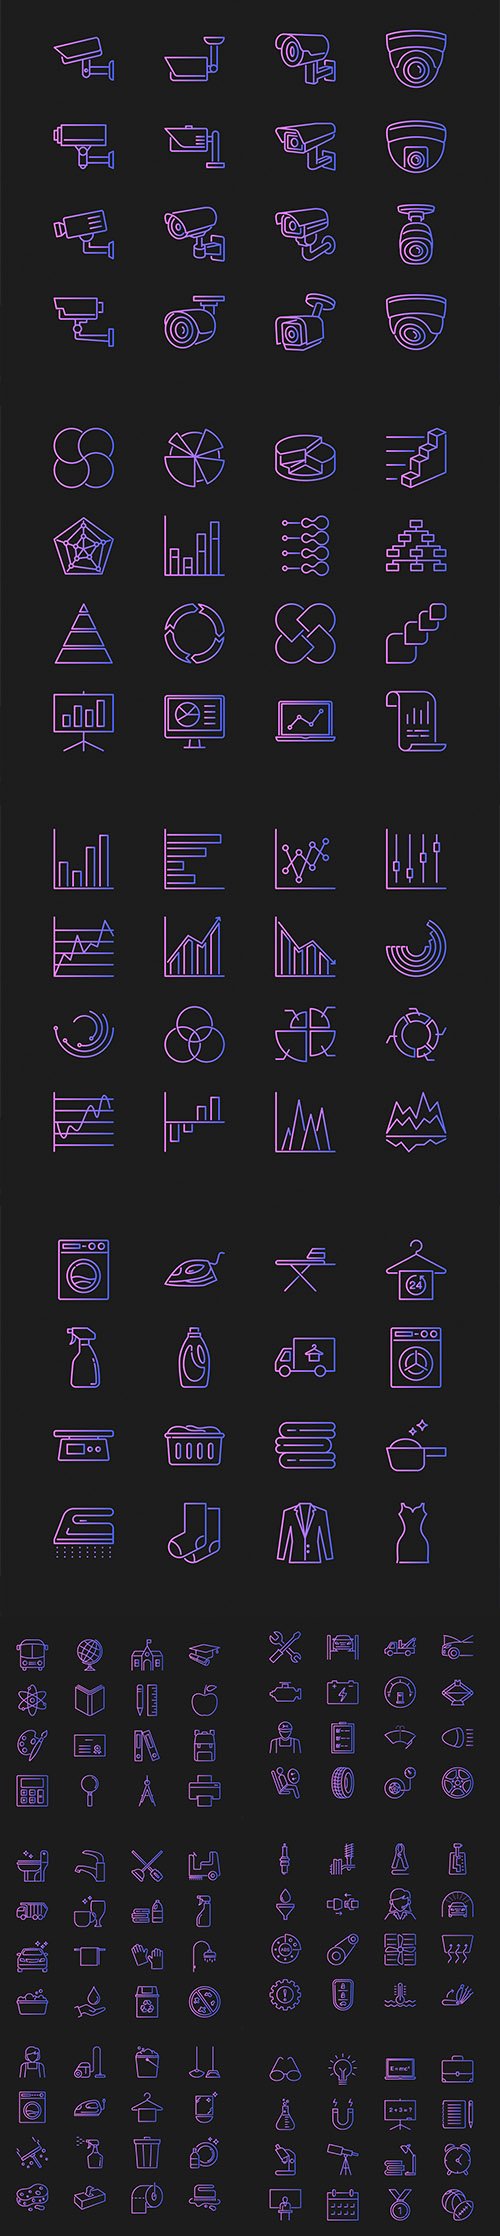 Vector Set of Different Concept Icons Vol 2